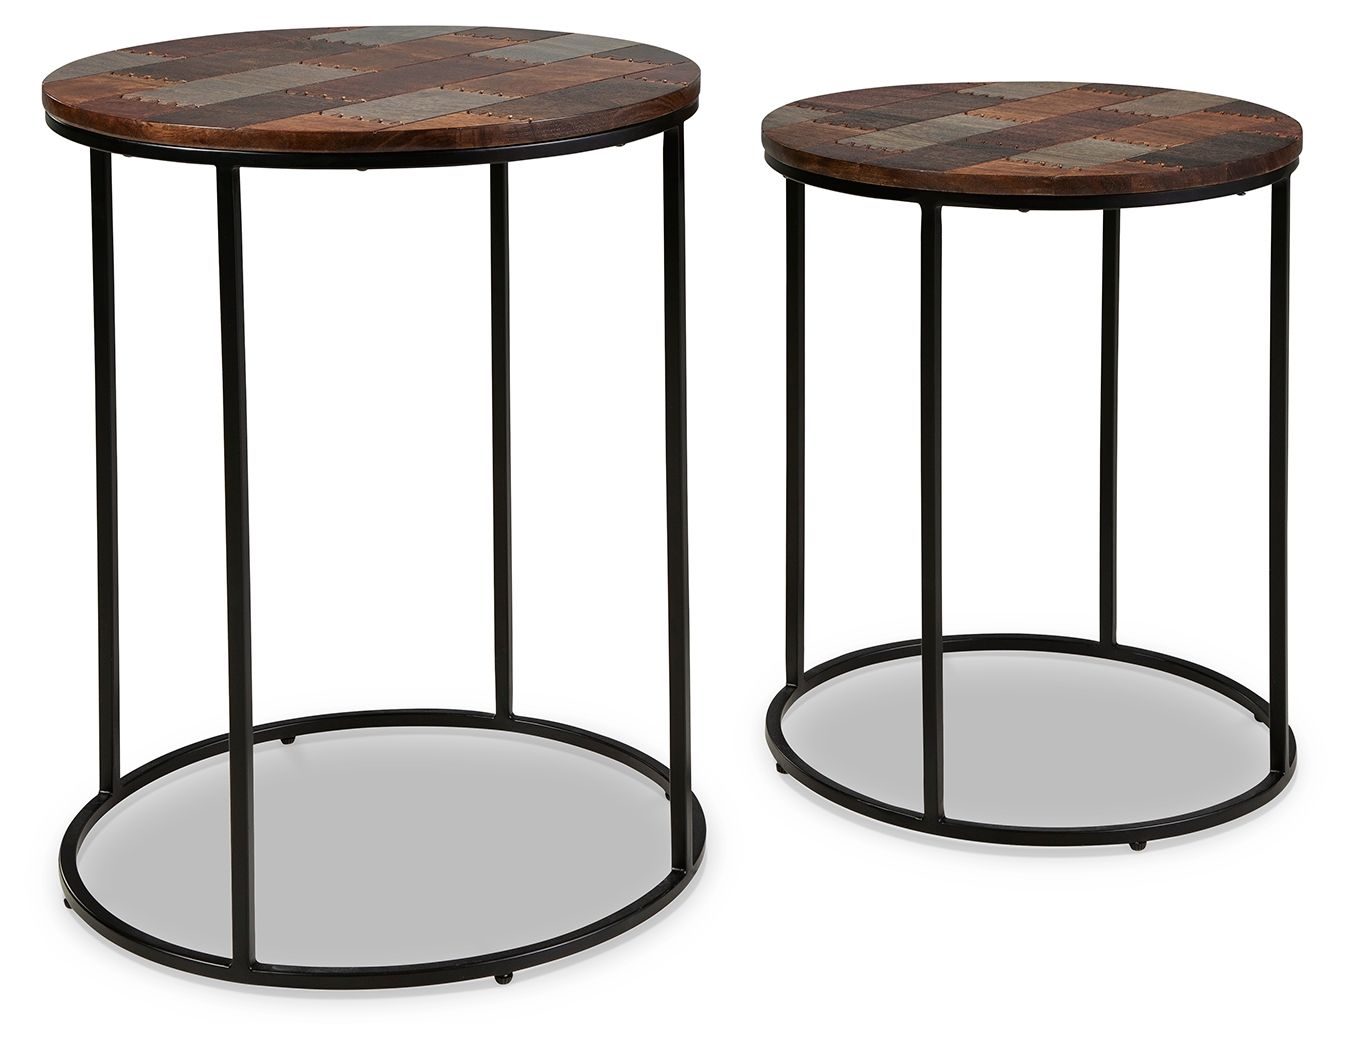 Allieton - Multi Brown - Accent Table (Set of 2)